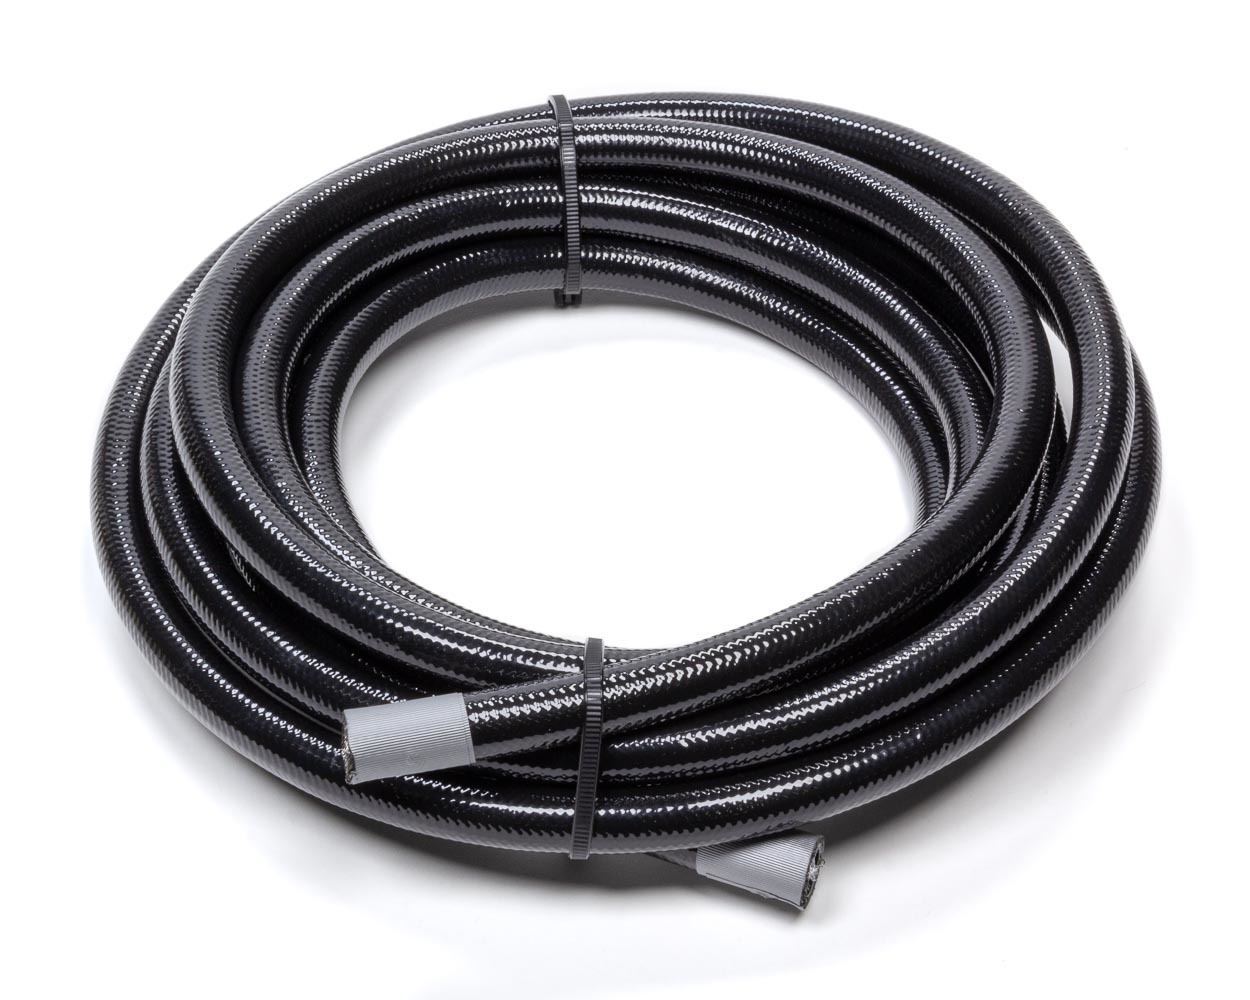 Fragola 601526 Hose, Series 6000, 6 AN, 15 ft, Braided Stainless / PTFE, Black, Each